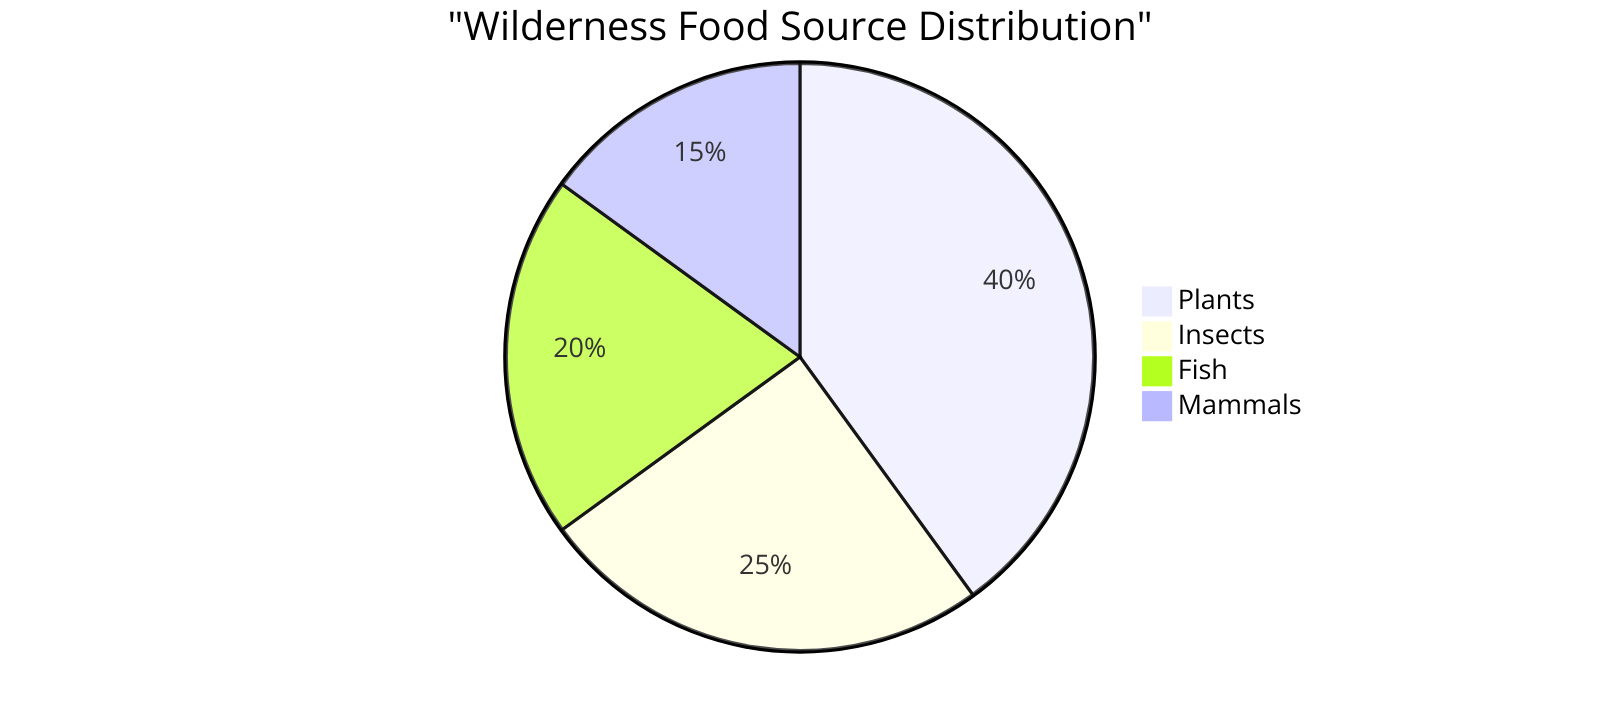 the percentage distribution of various food sources in the wilderness, showing the potential nutritional contributions of each